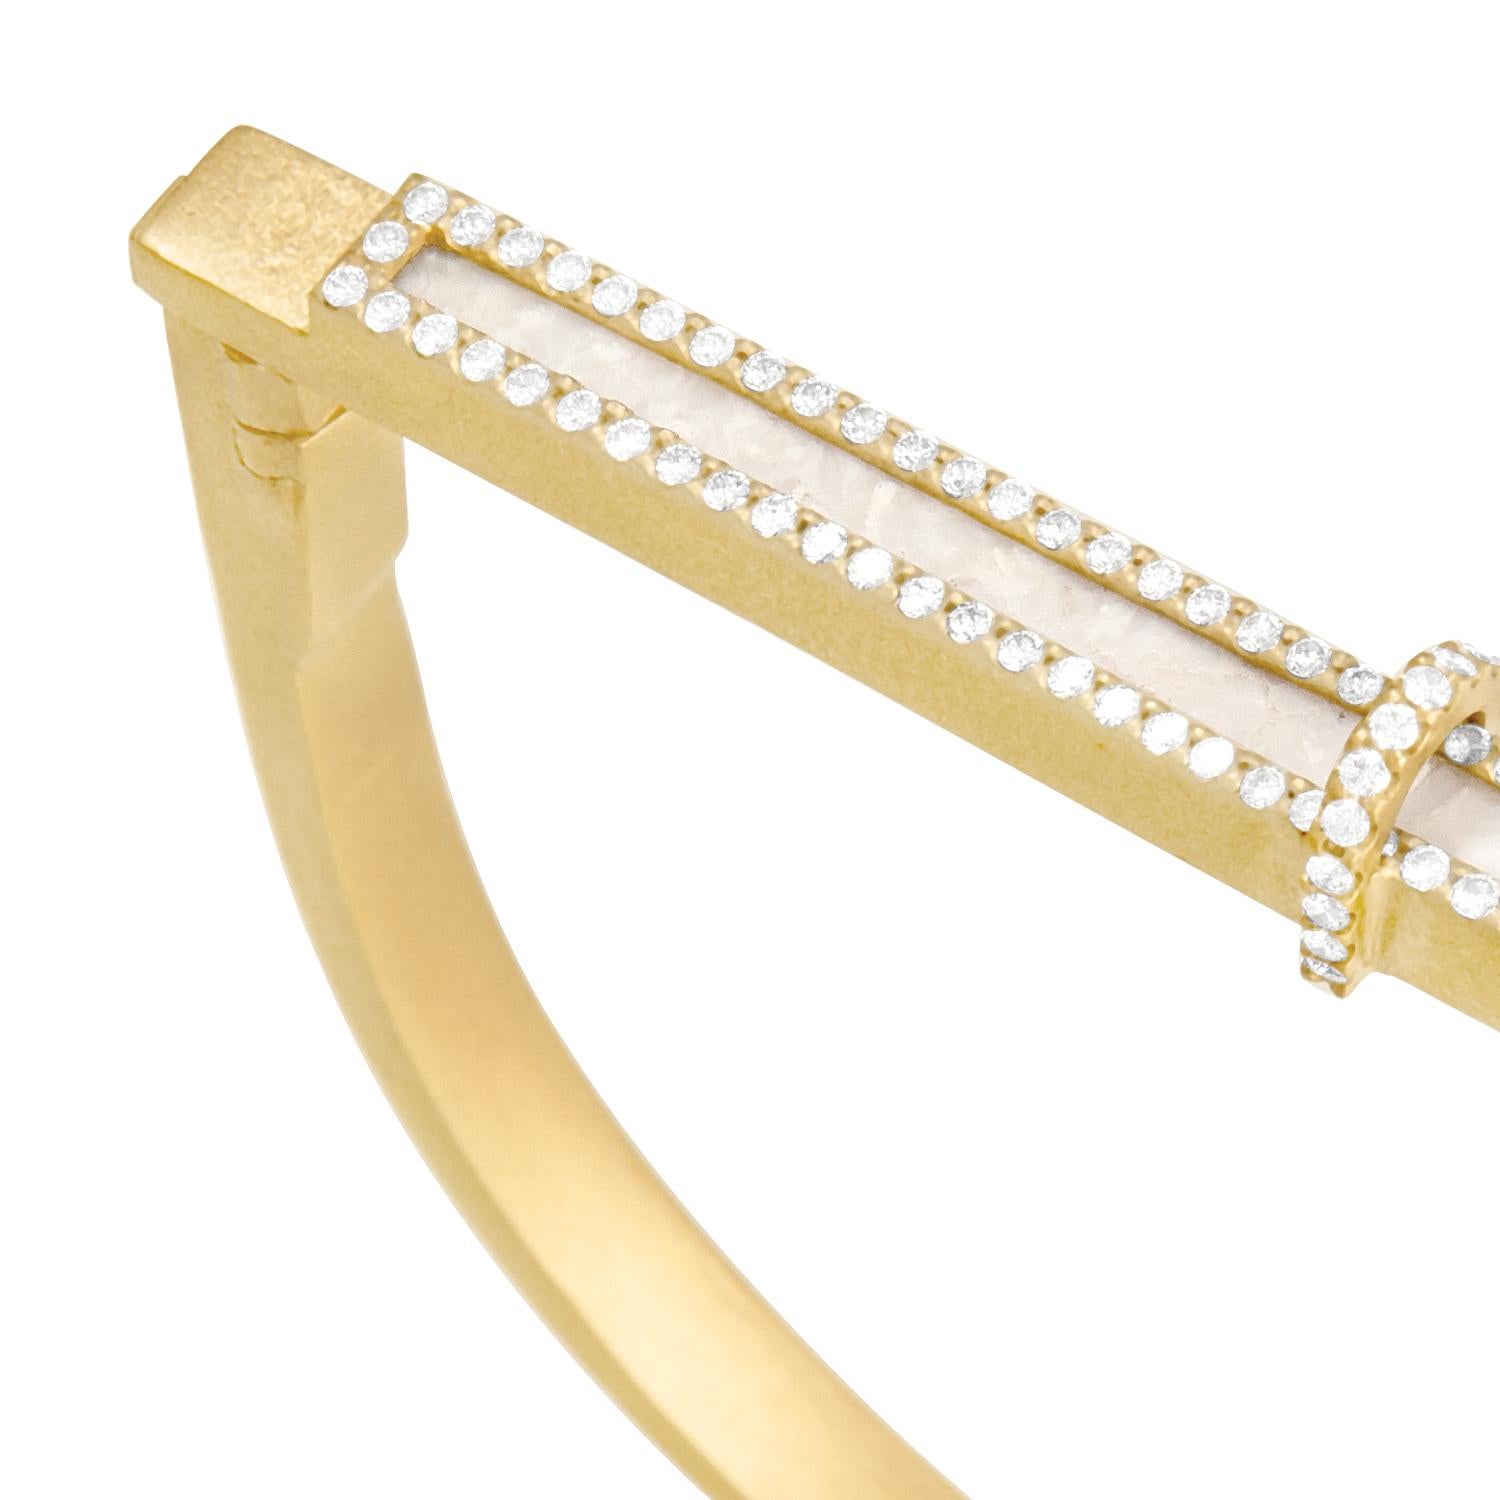 Cream fossilized dinosaur bone dimension bracelet with white diamond pavé, 18 carat recycled yellow gold, 0.29 TCW

Available by Special Order

The latitudinal axis of this 18 carat recycled yellow gold bangle is inlaid with cream fossilized